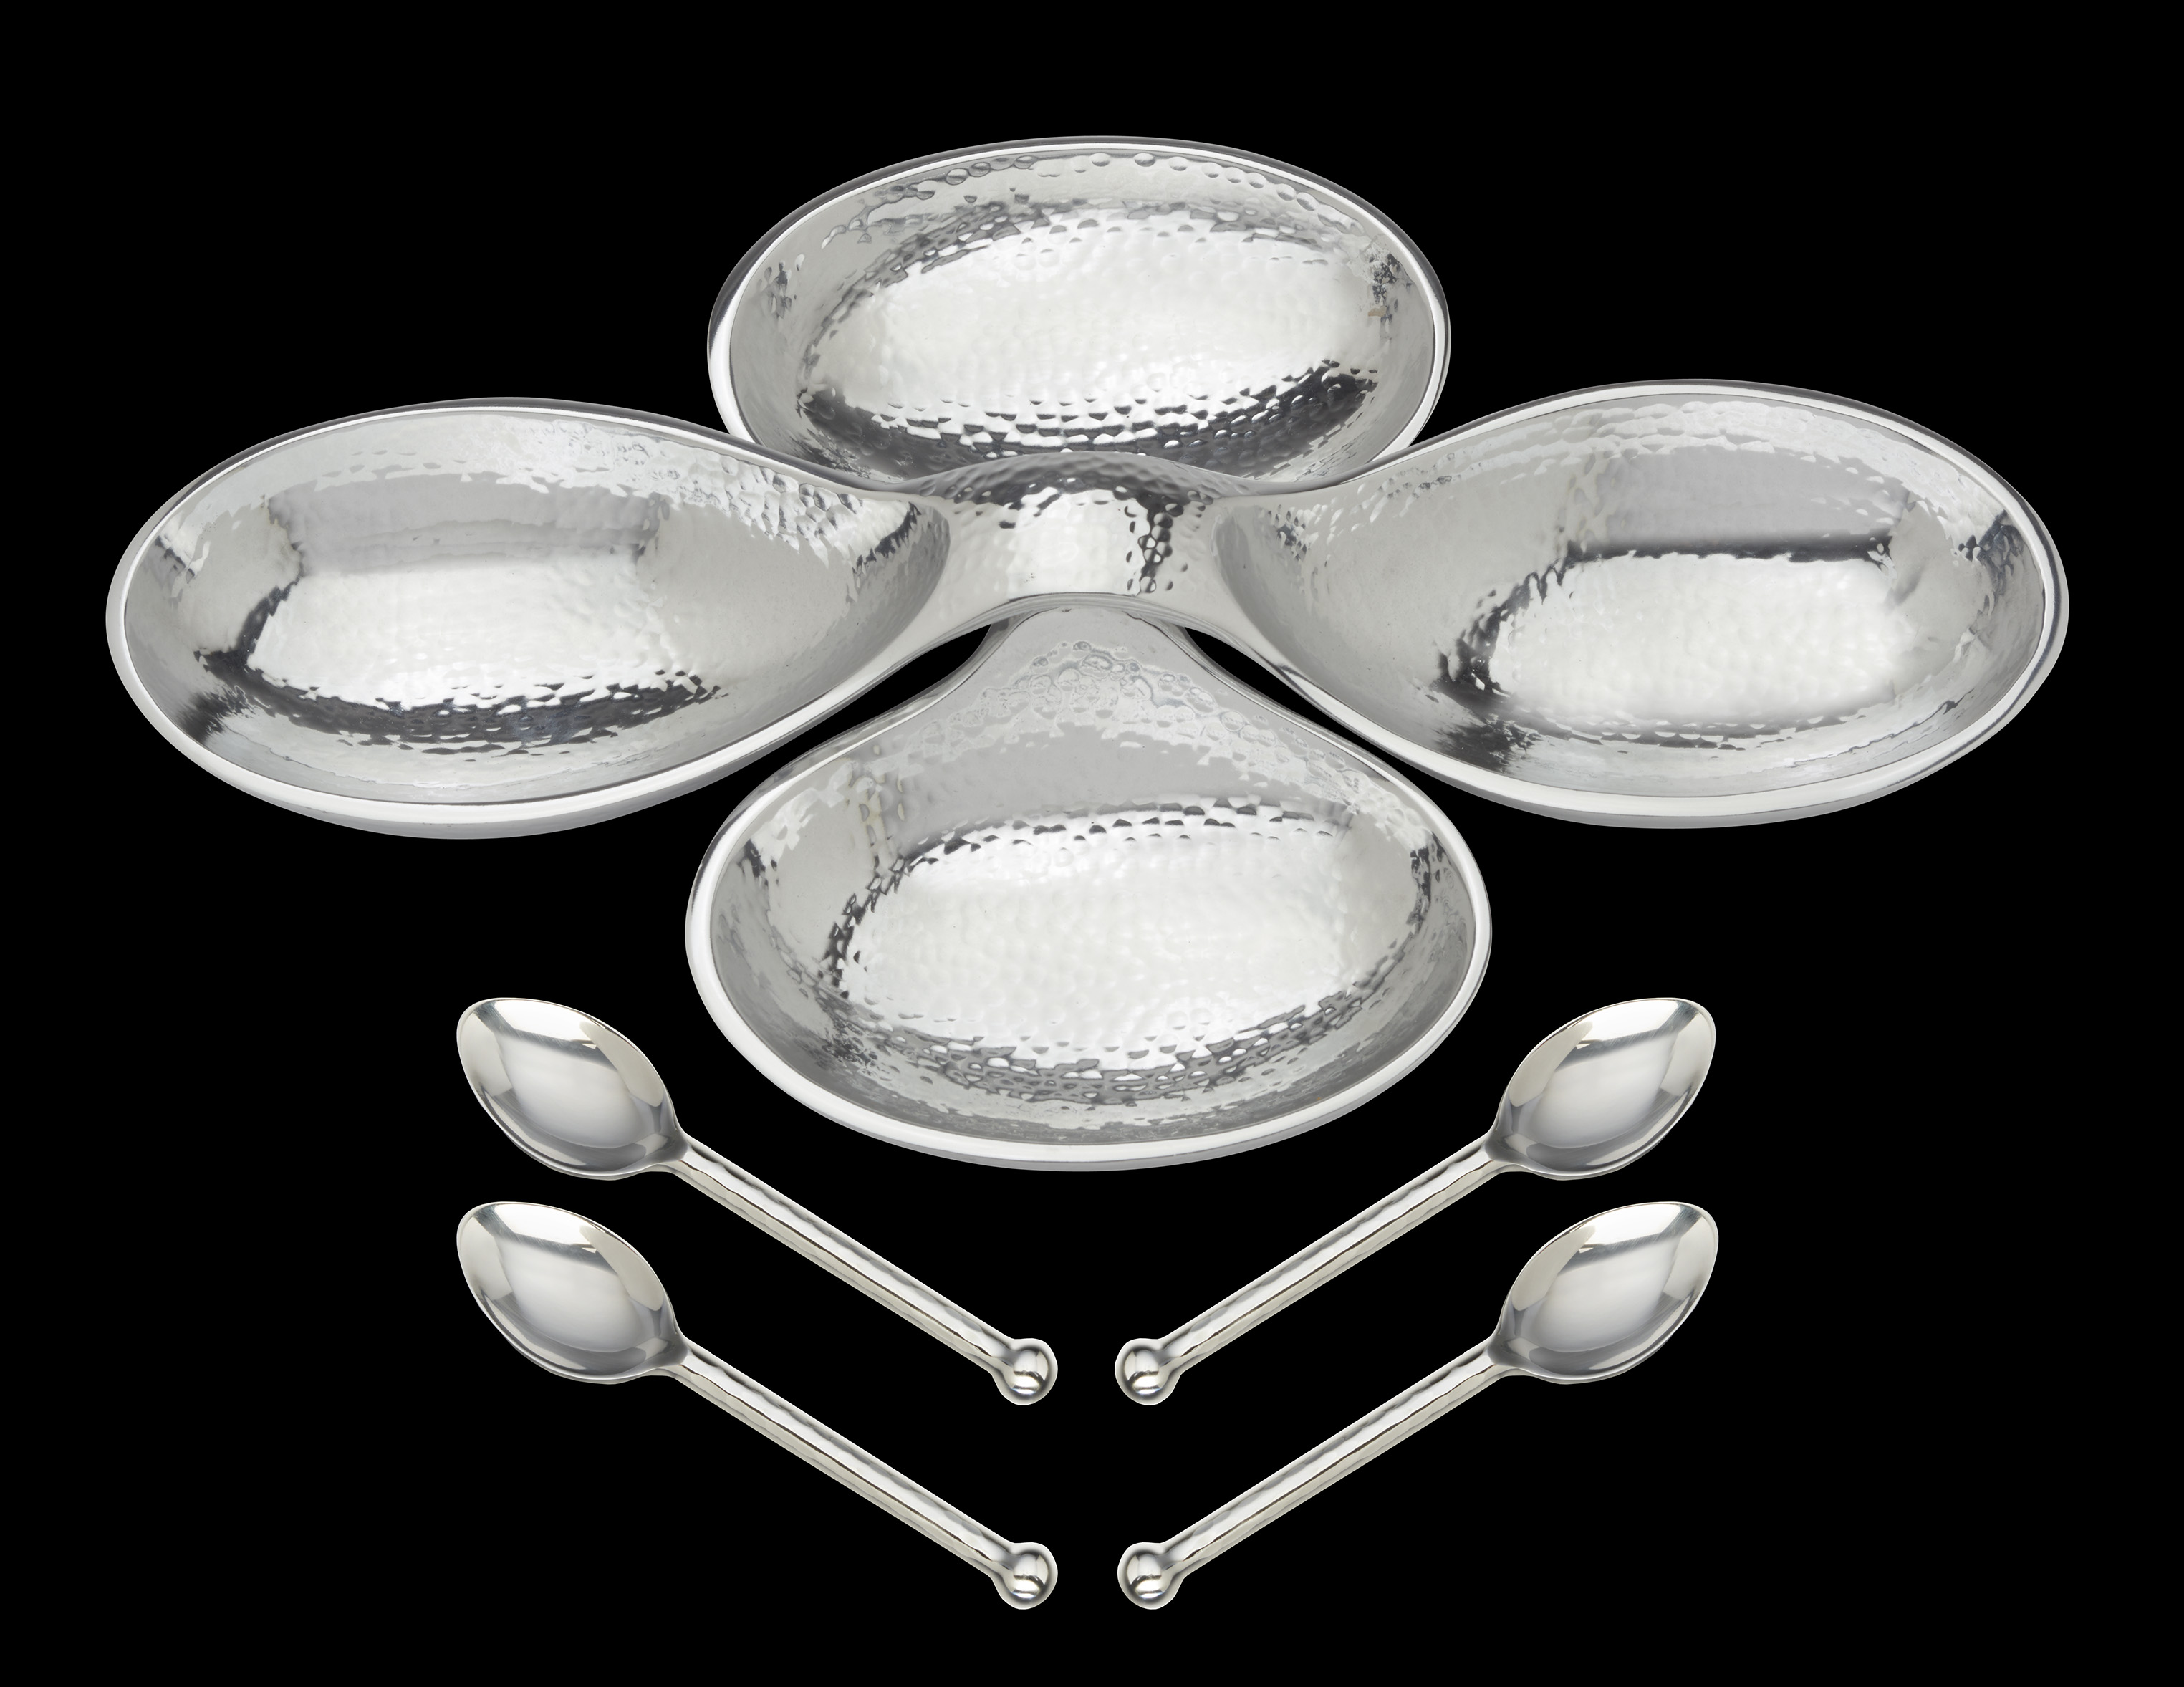 Hammered Silver Helix Bowls with 4 Simple Spoons.